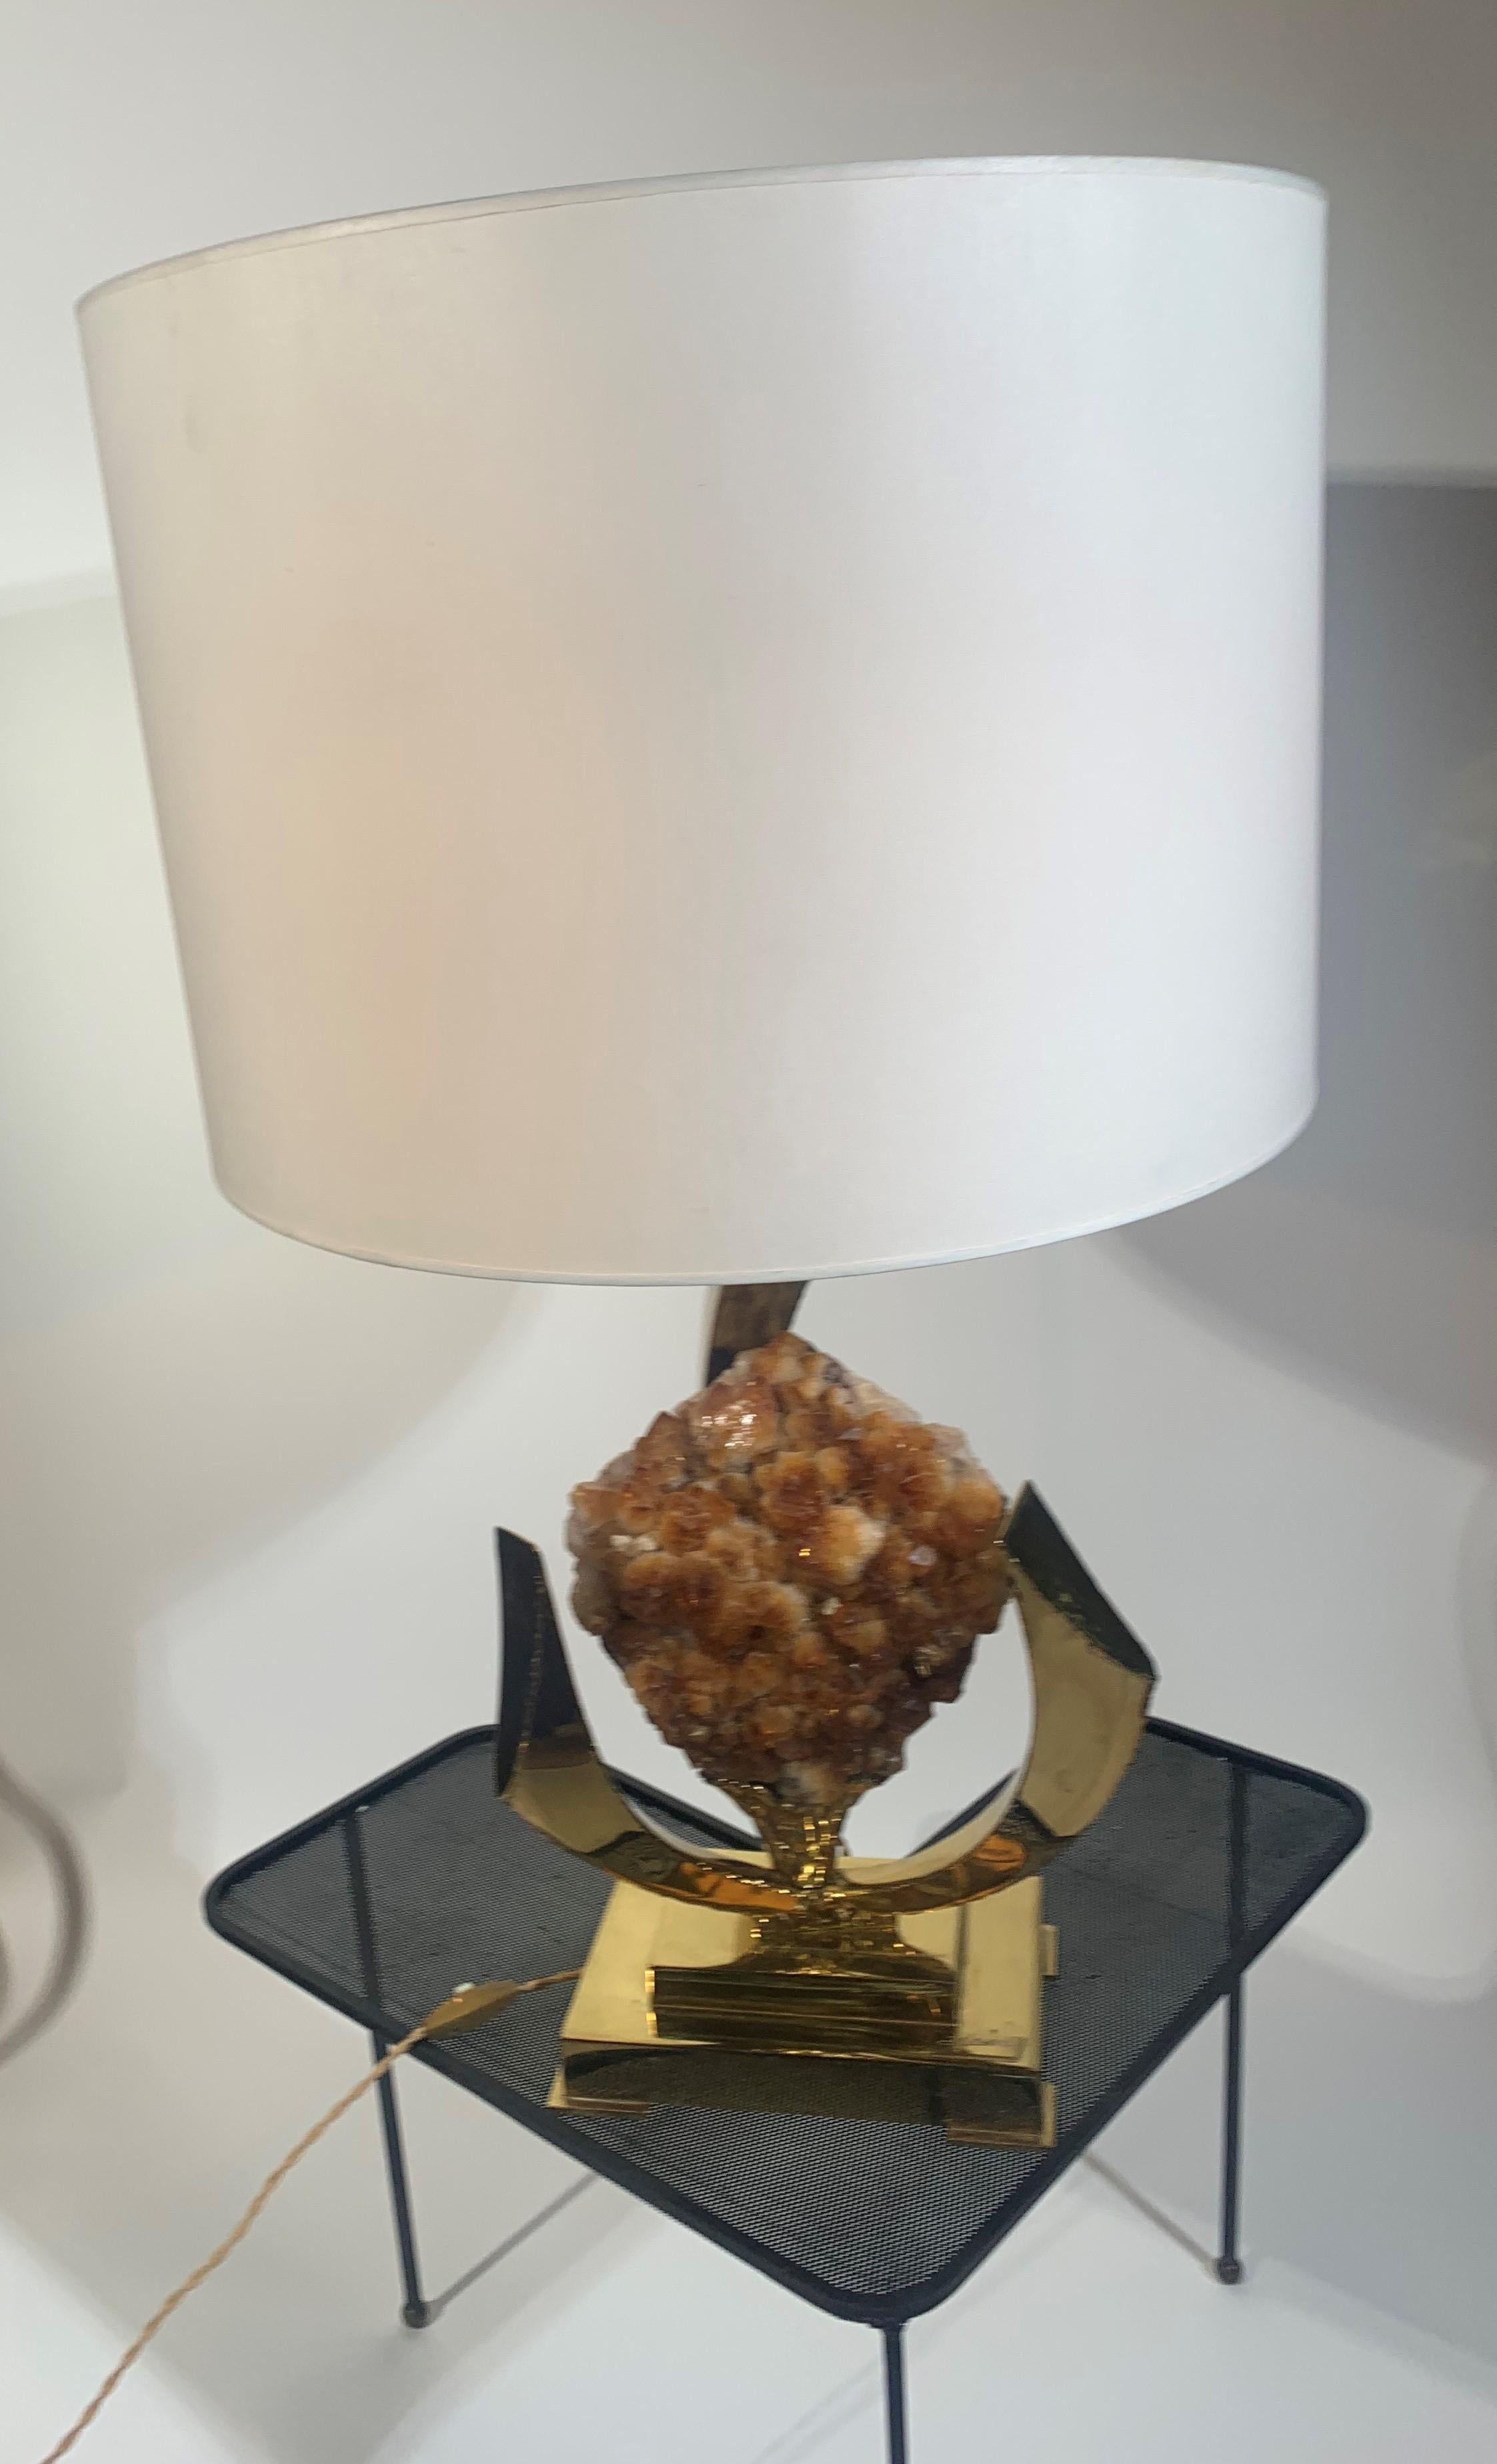 Lamp adorned with a golden rock crystal geode from Duval Brasseur.